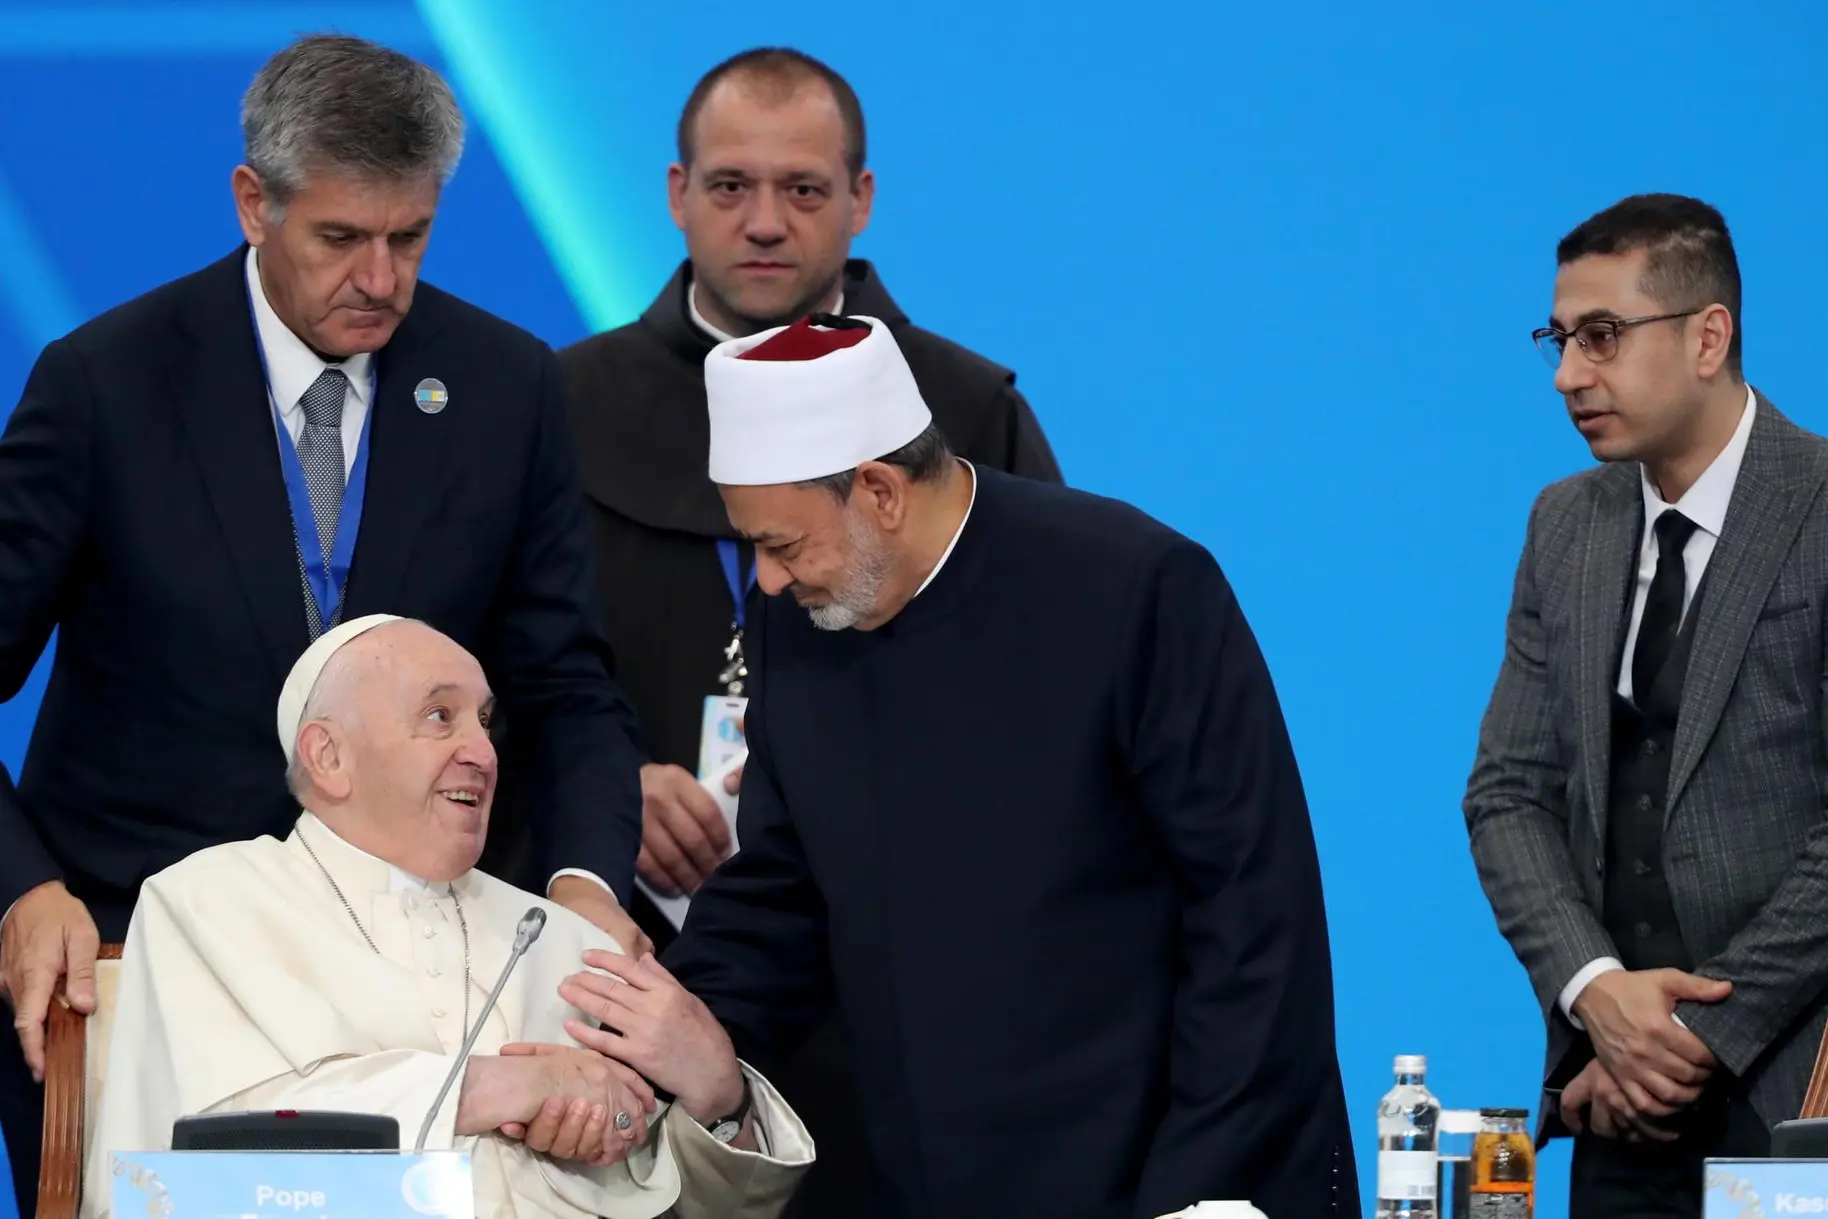 epa10182921 Pope Francis (L) is welcomed by a participant (C) as he takes his seat to attend the opening session of the VII Congress of Leaders of World and Traditional Religions in Nur-Sultan, Kazakhstan, 14 September 2022. The Pontiff on 13 September had already met with Kazakhstan's President Jomart Tokaev and will now attend the VII Congress of Leaders of World and Traditional Religions that runs from 14-15 September in the Kazakh capital. EPA/IGOR KOVALENKO